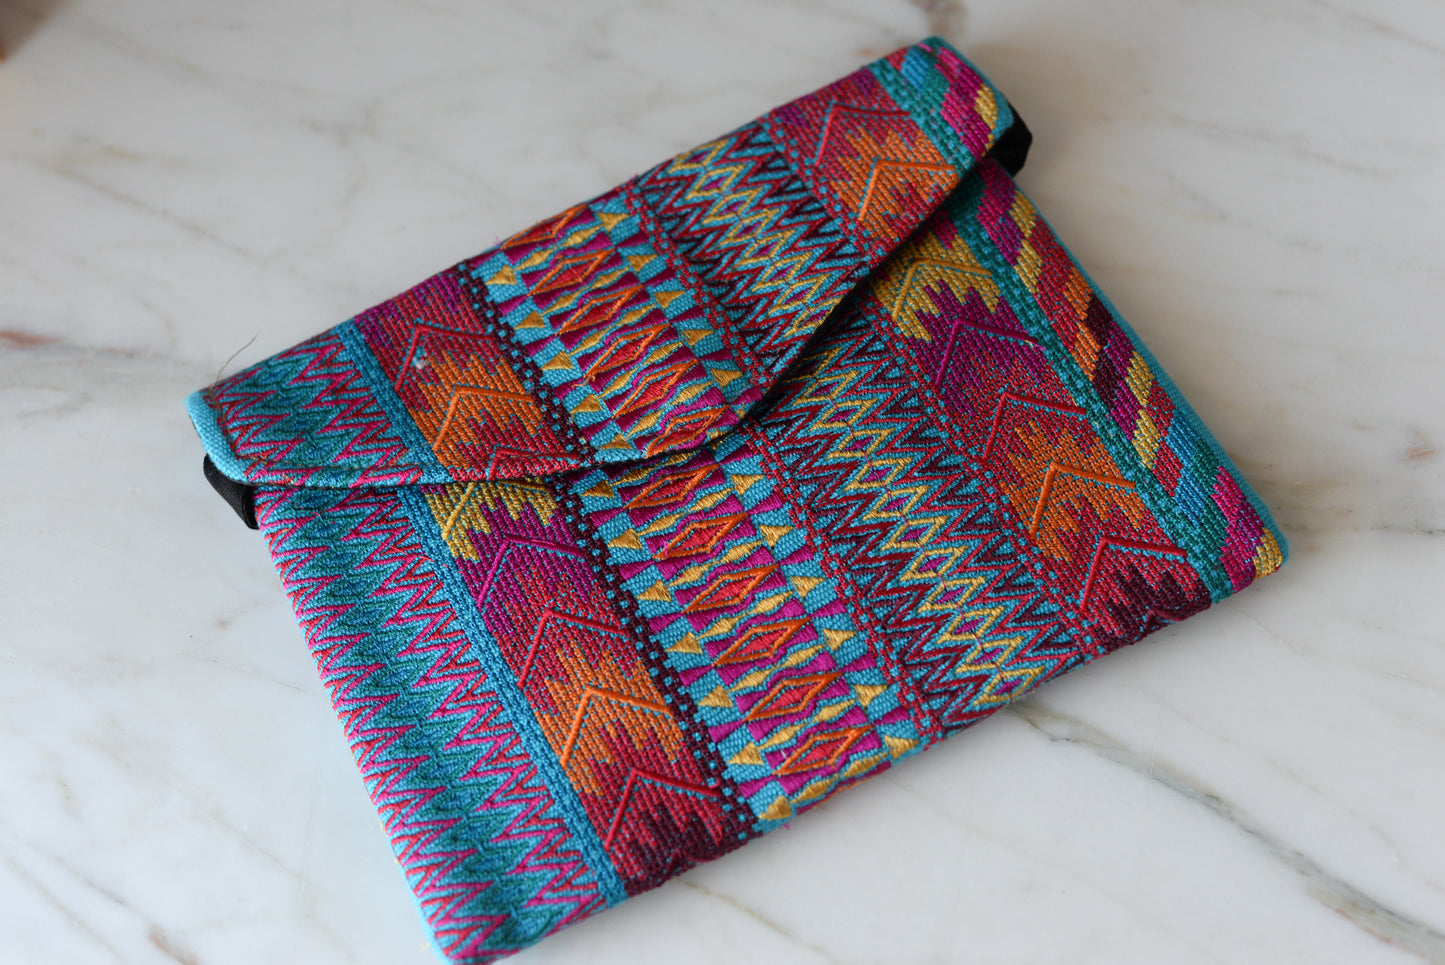 Colorful Mayan Clutch from Chiapas - The Little Pueblo